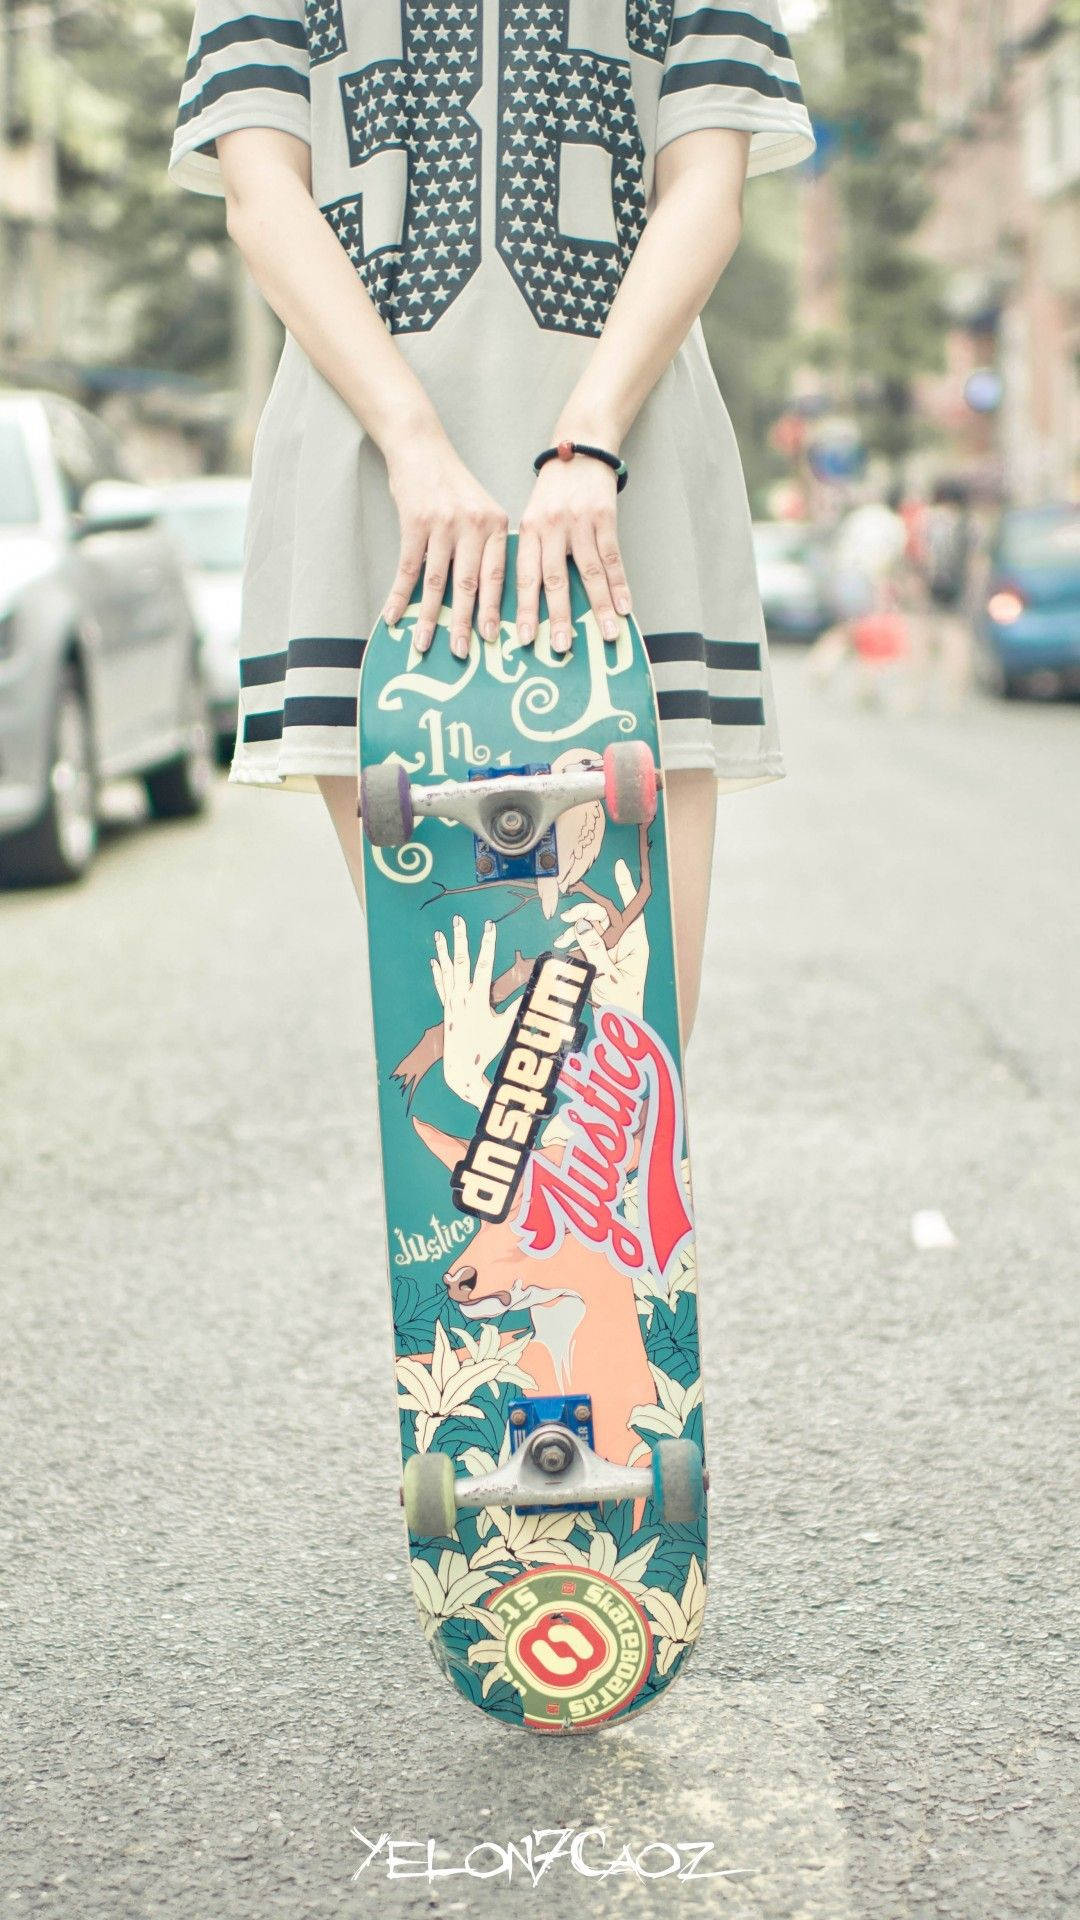 Half Body Of Girl With Skateboard iPhone Wallpaper